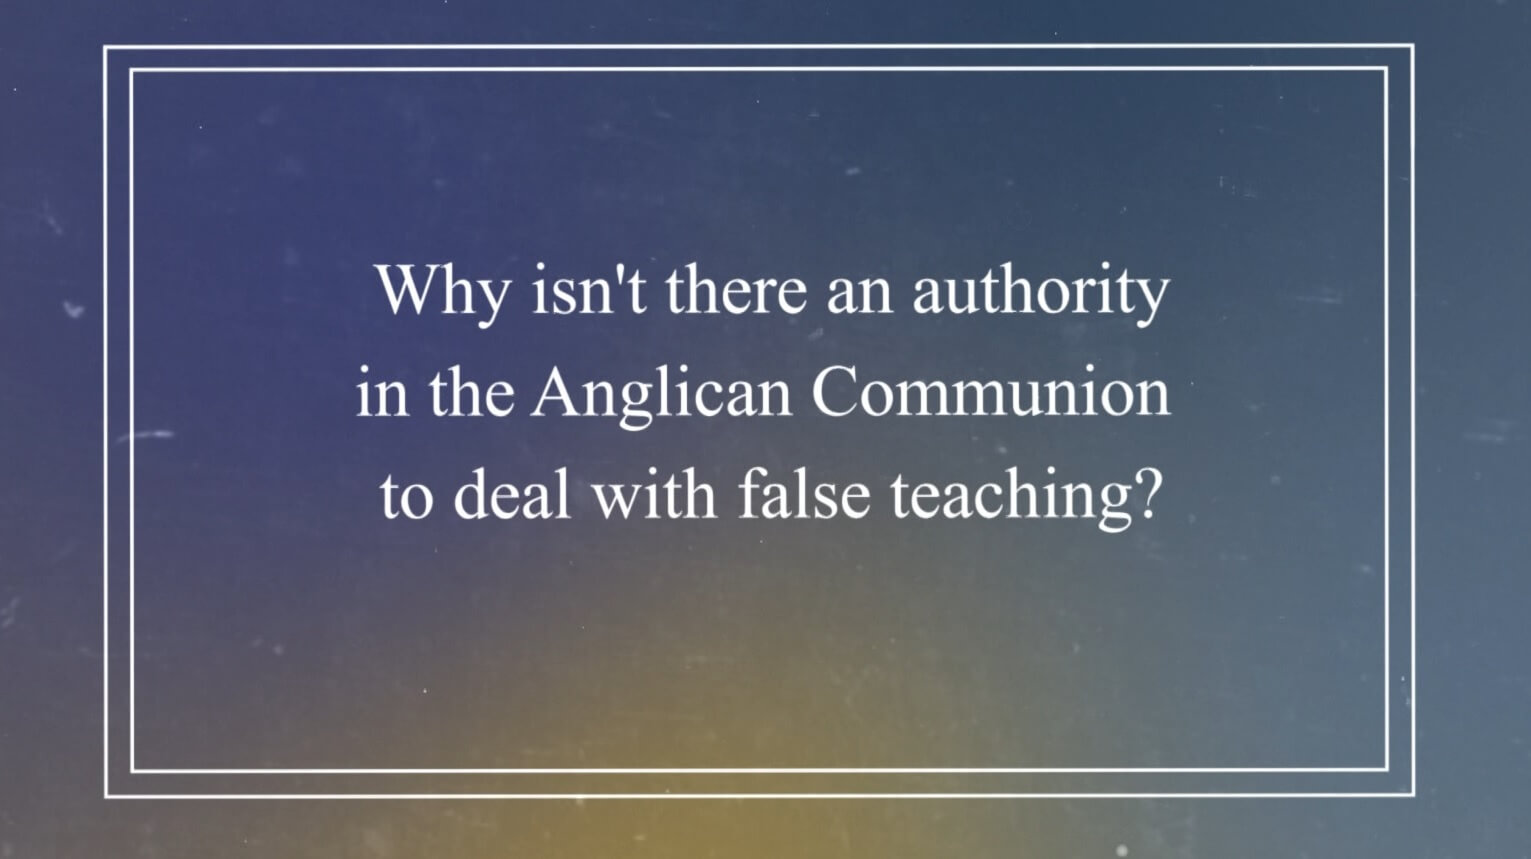 Why isn’t there an authority in the Anglican Communion to deal with false teaching?